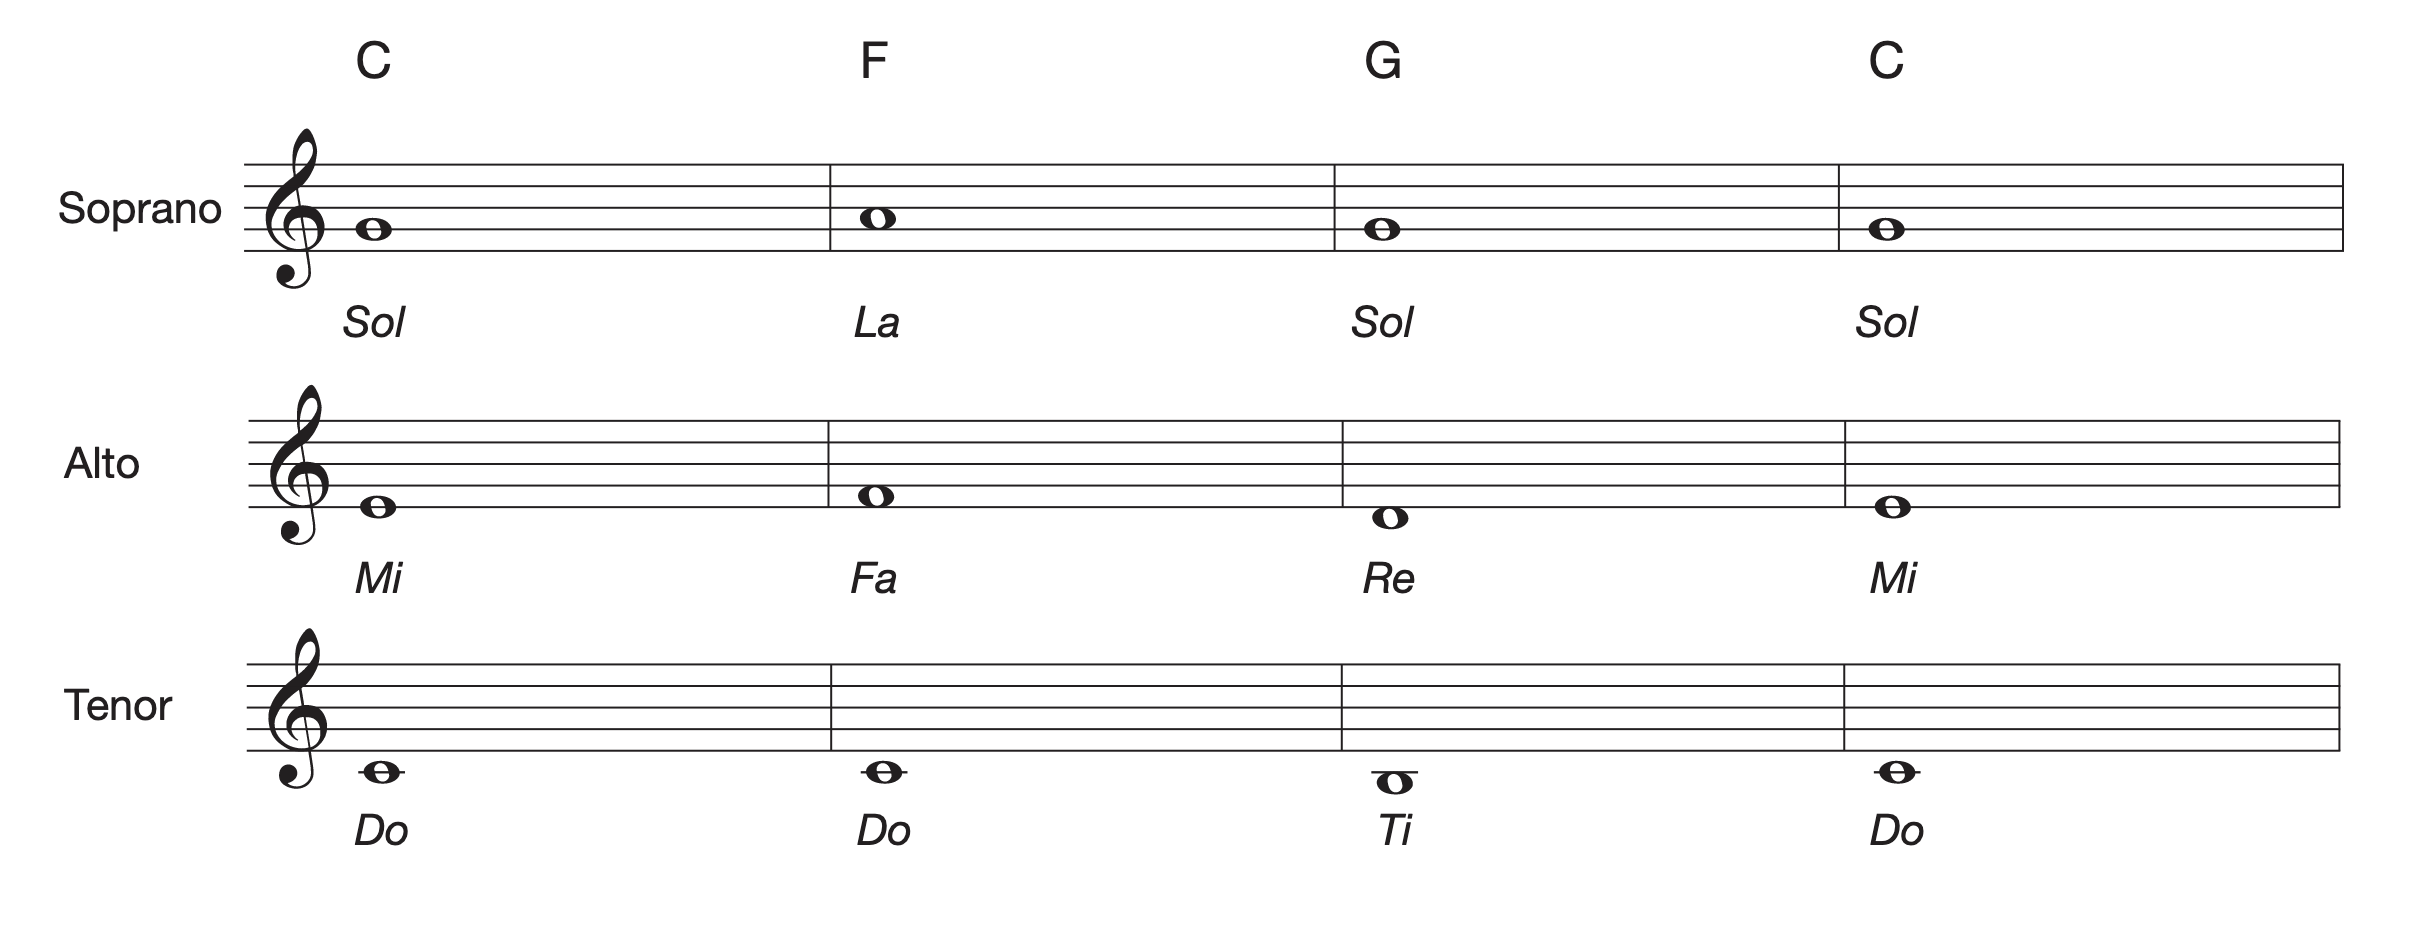 In this music notation example, each voice forms a melodic line, creating smooth voice leading.